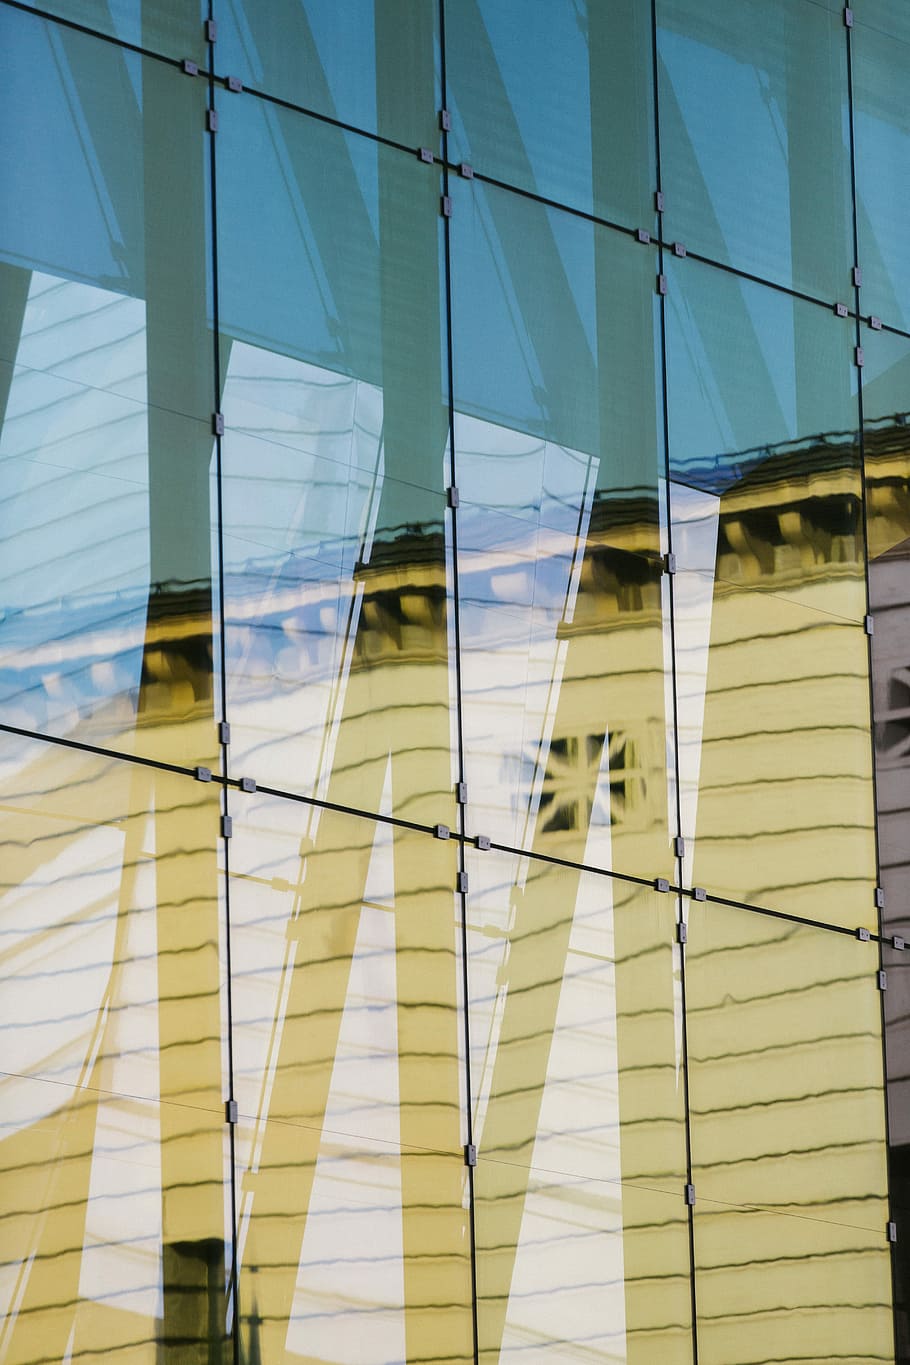 reflection of white structure in building window, glass, window, reflection, abstract, shapes, pattern, HD wallpaper